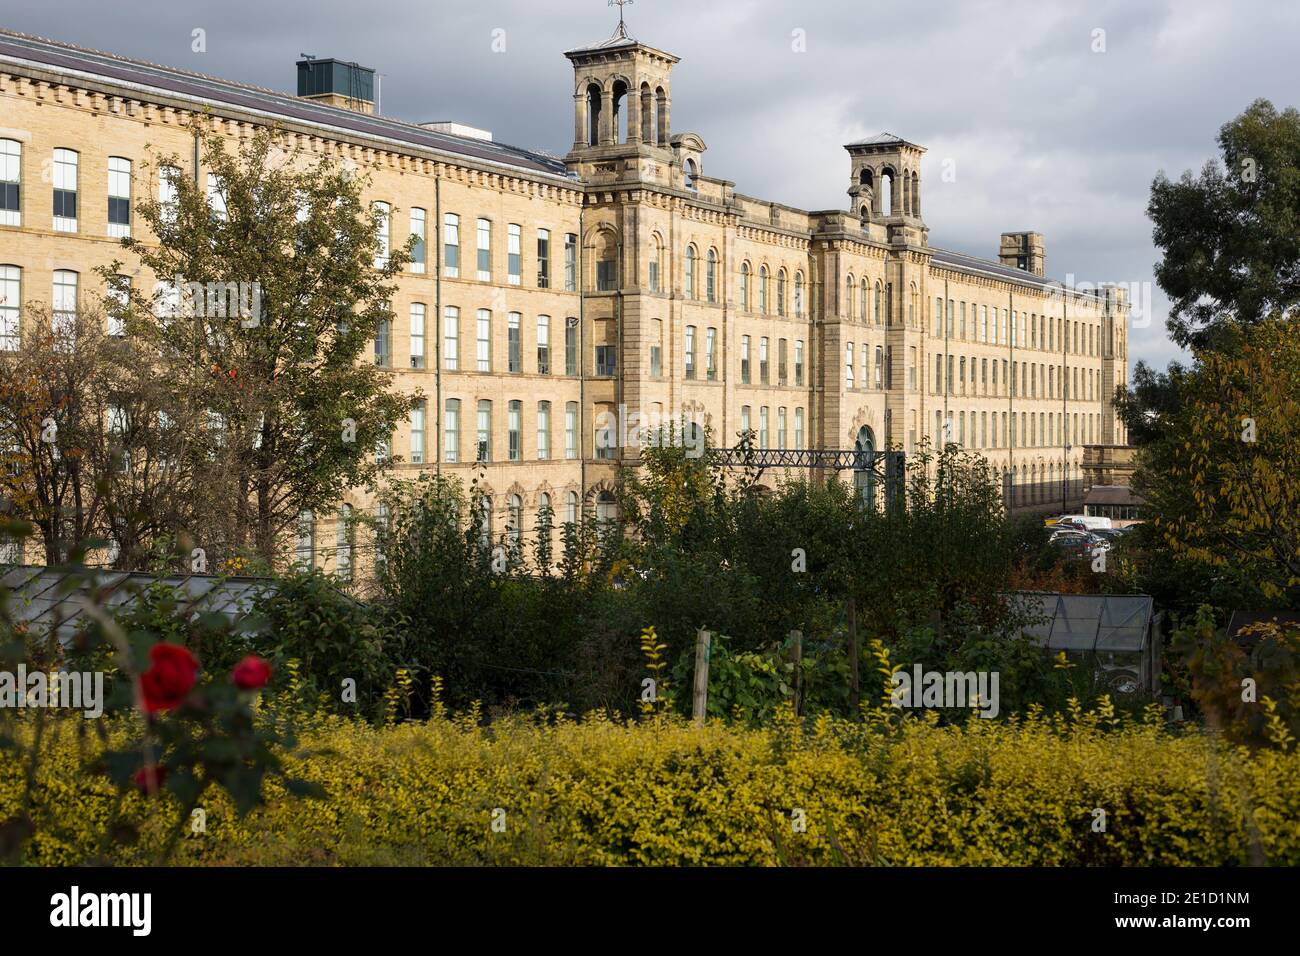 https://c8.alamy.com/comp/2E1D1NM/salts-mill-a-unesco-world-heritage-site-the-1853-gallery-saltaire-bradford-west-yorkshire-the-gallery-hosts-work-by-the-artist-david-hockney-2E1D1NM.jpg